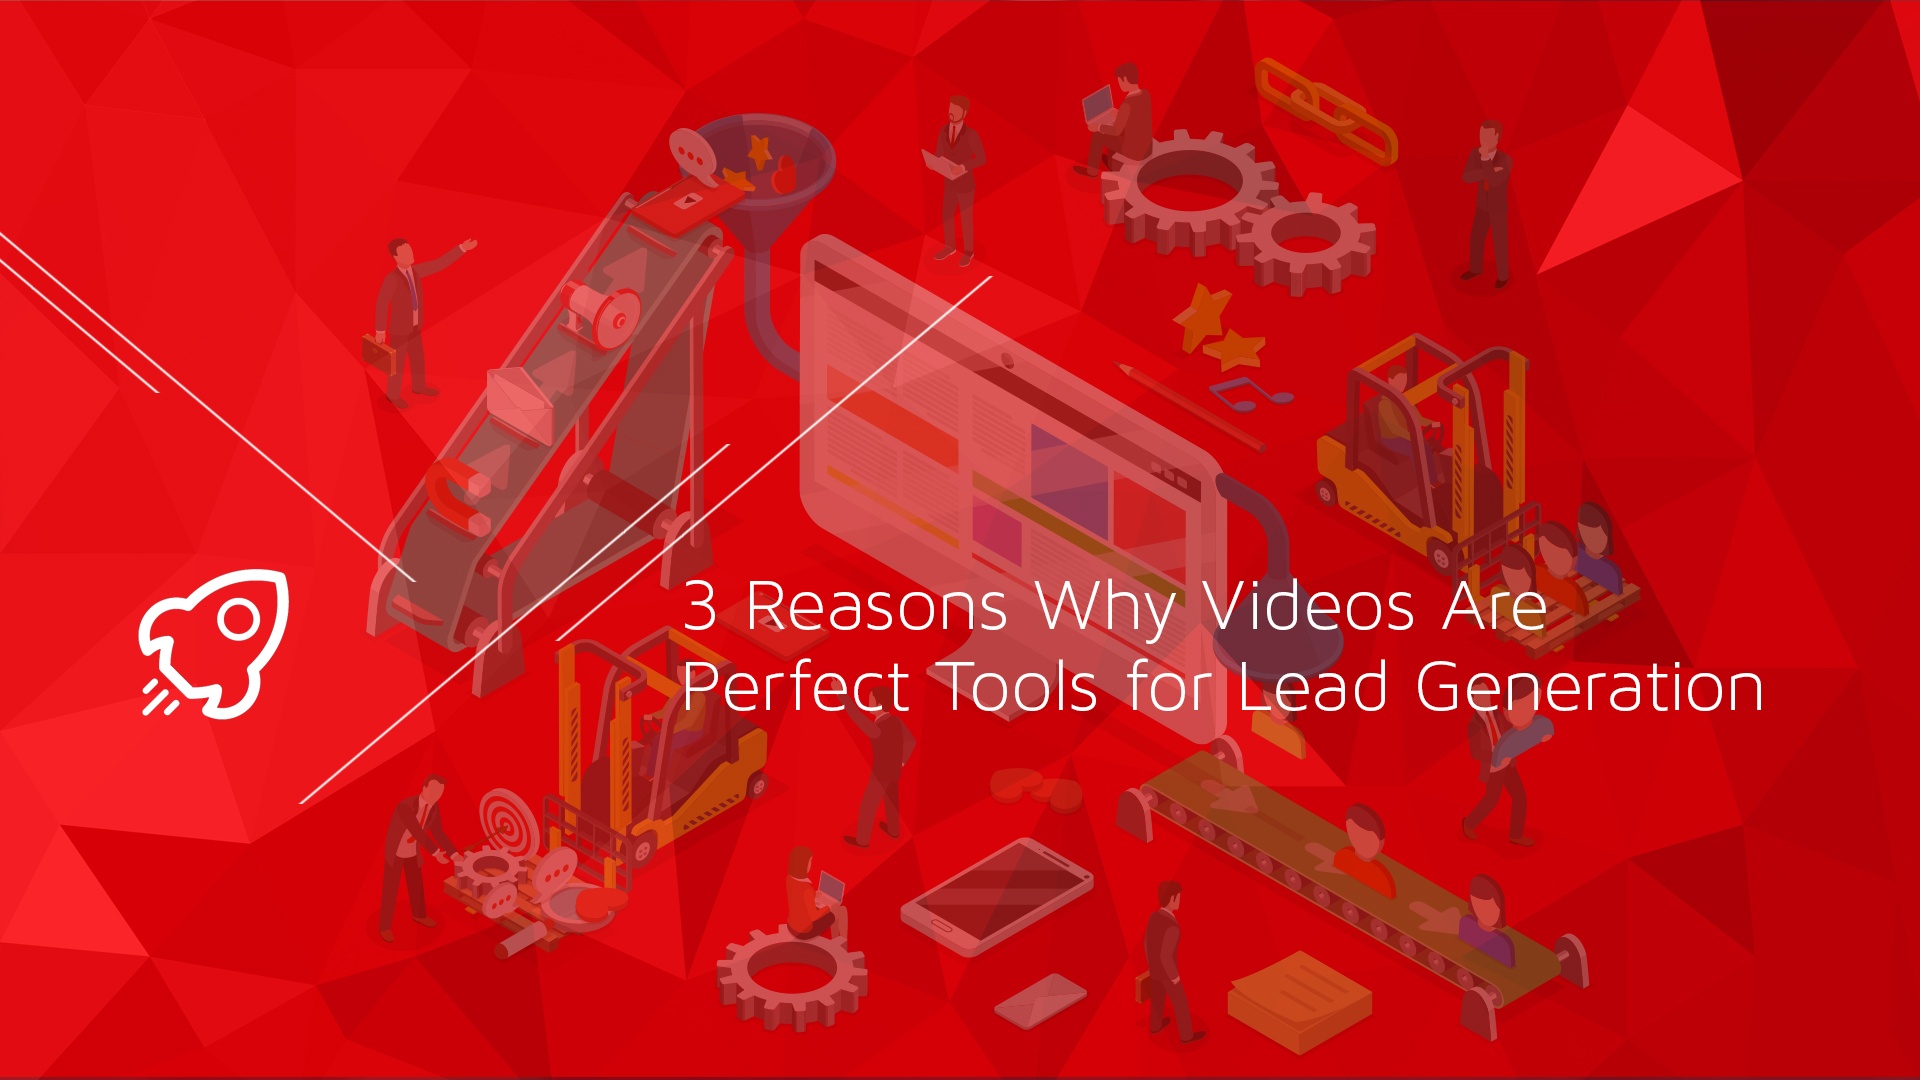 3 Reasons Why Videos Are Perfect Tools for Lead Generation